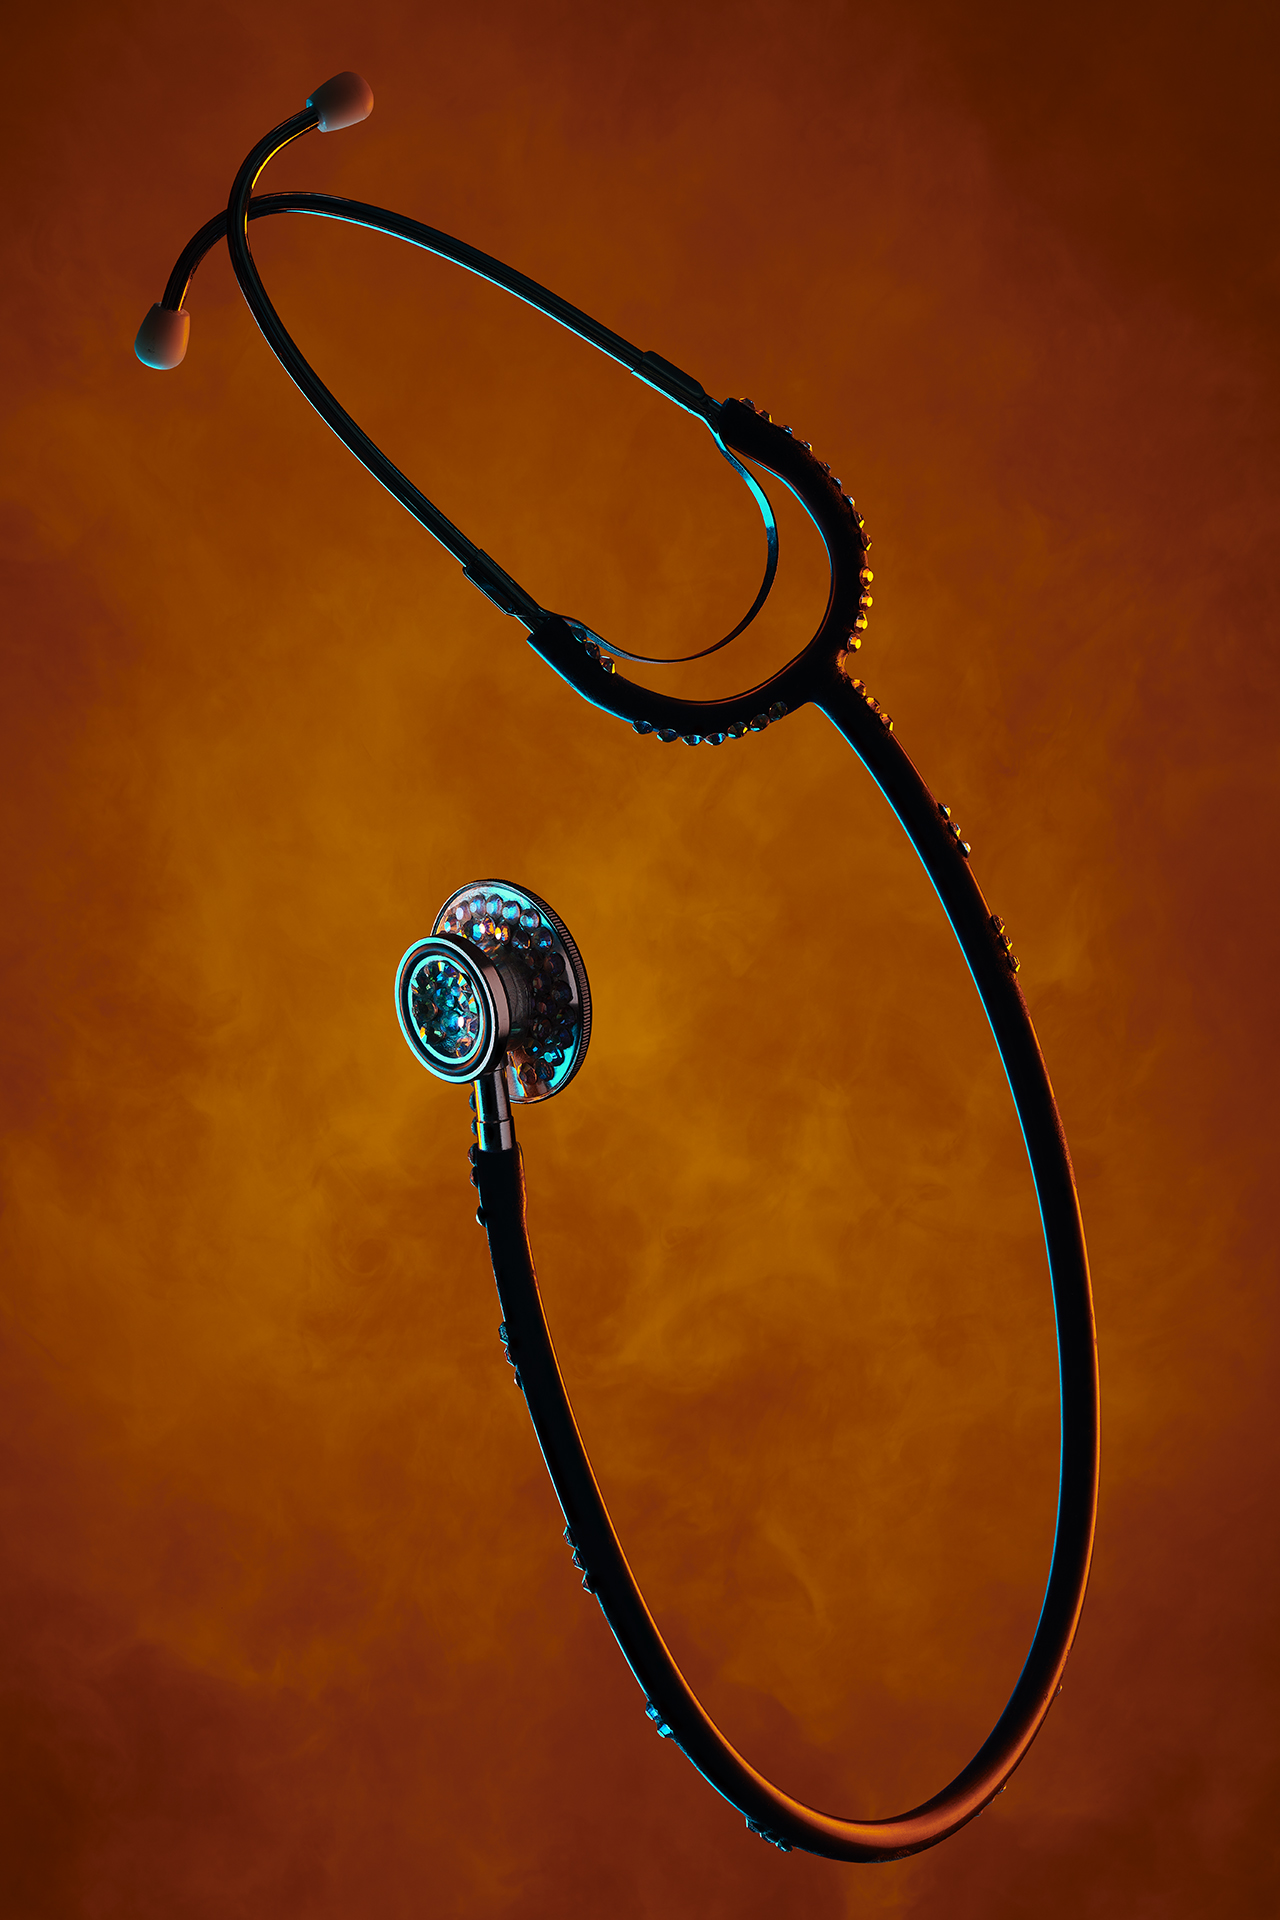 Decorated stethoscope, (c) Theo Deproost